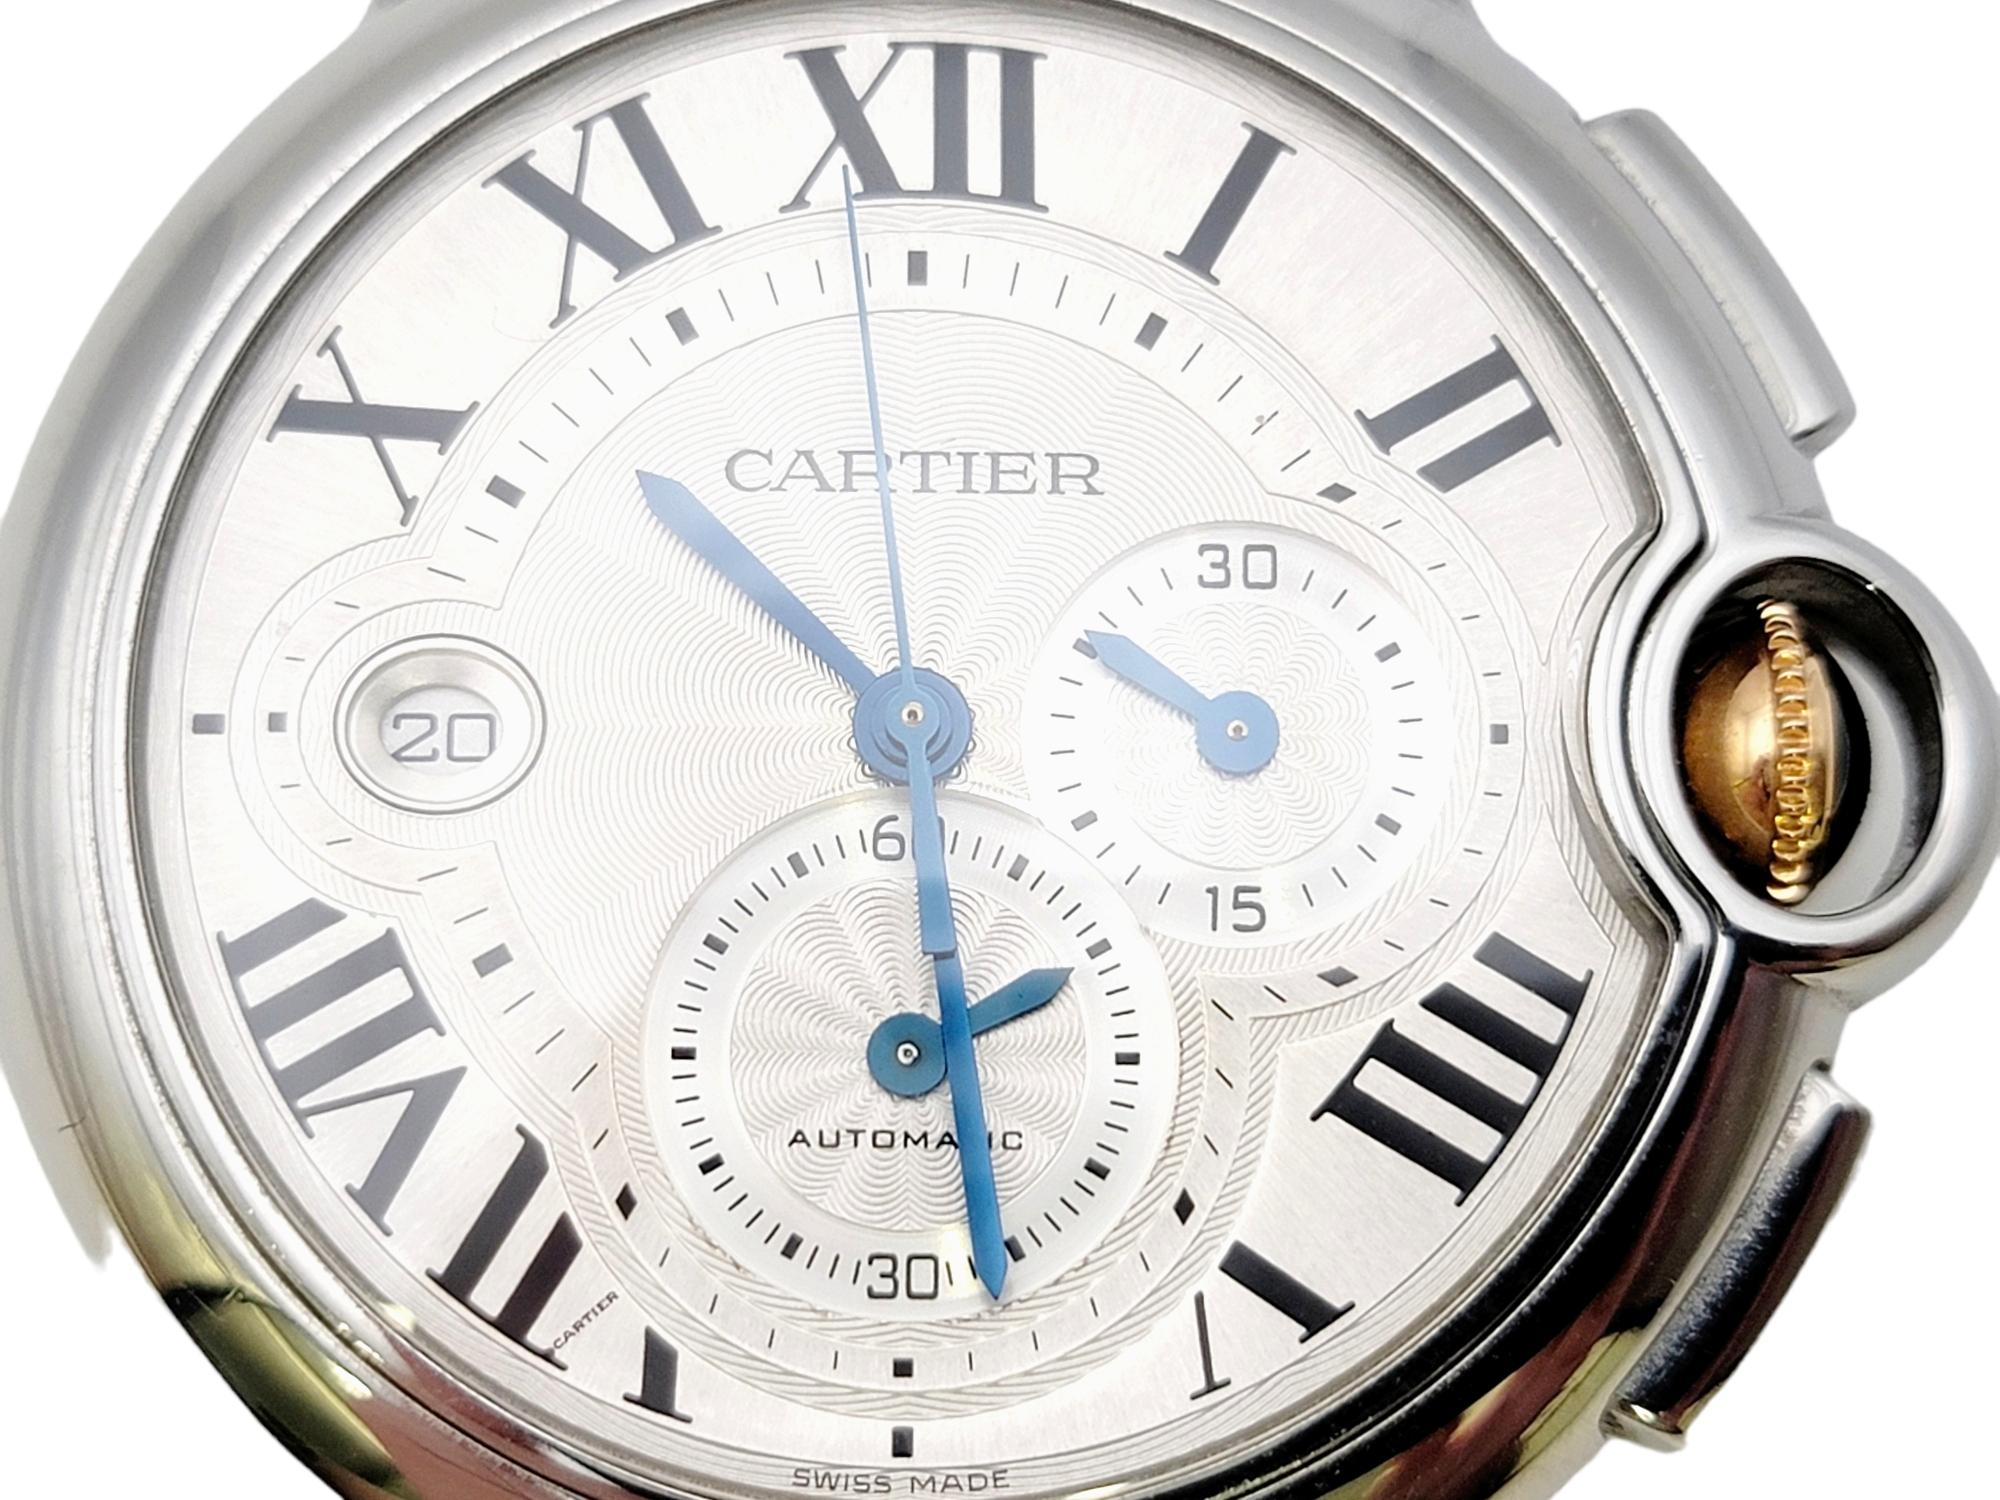 Exquisite unisex wristwatch designed by Cartier. Extra large in size, the round dial features blue steel hands, a silver dial, automatic movement, chronograph, date display and black Roman numeral markers. The flexible links are made of polished